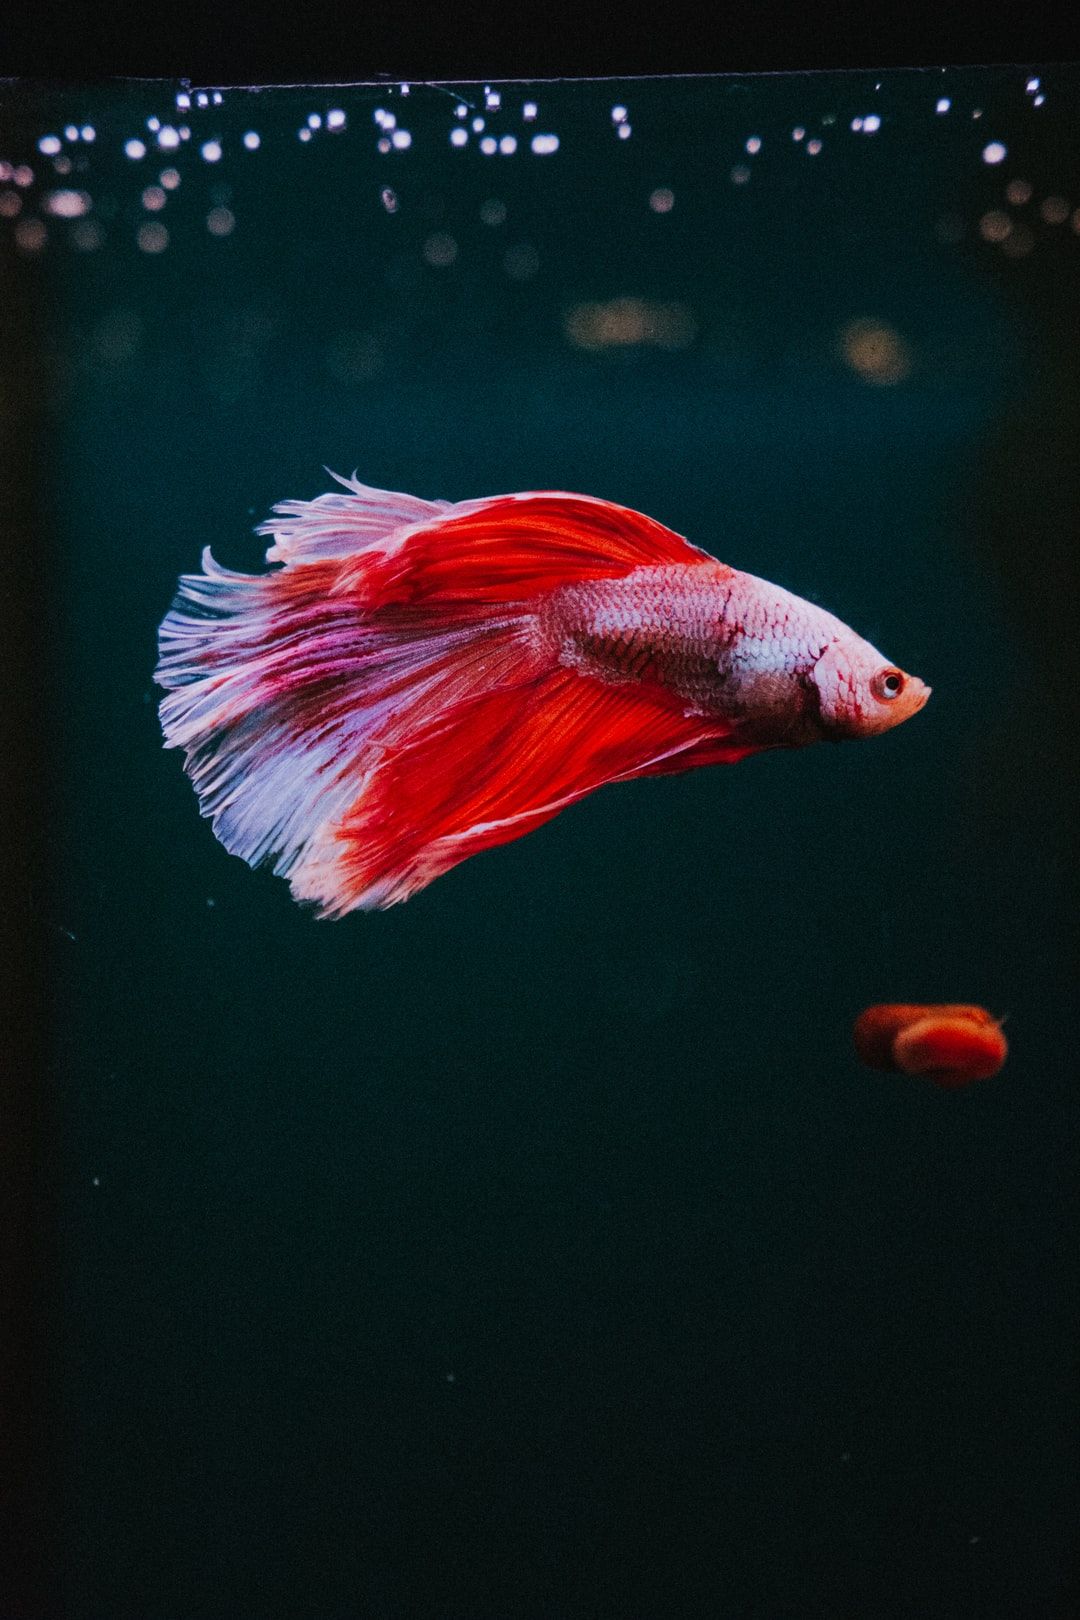 Betta Fish Picture. Download Free Image